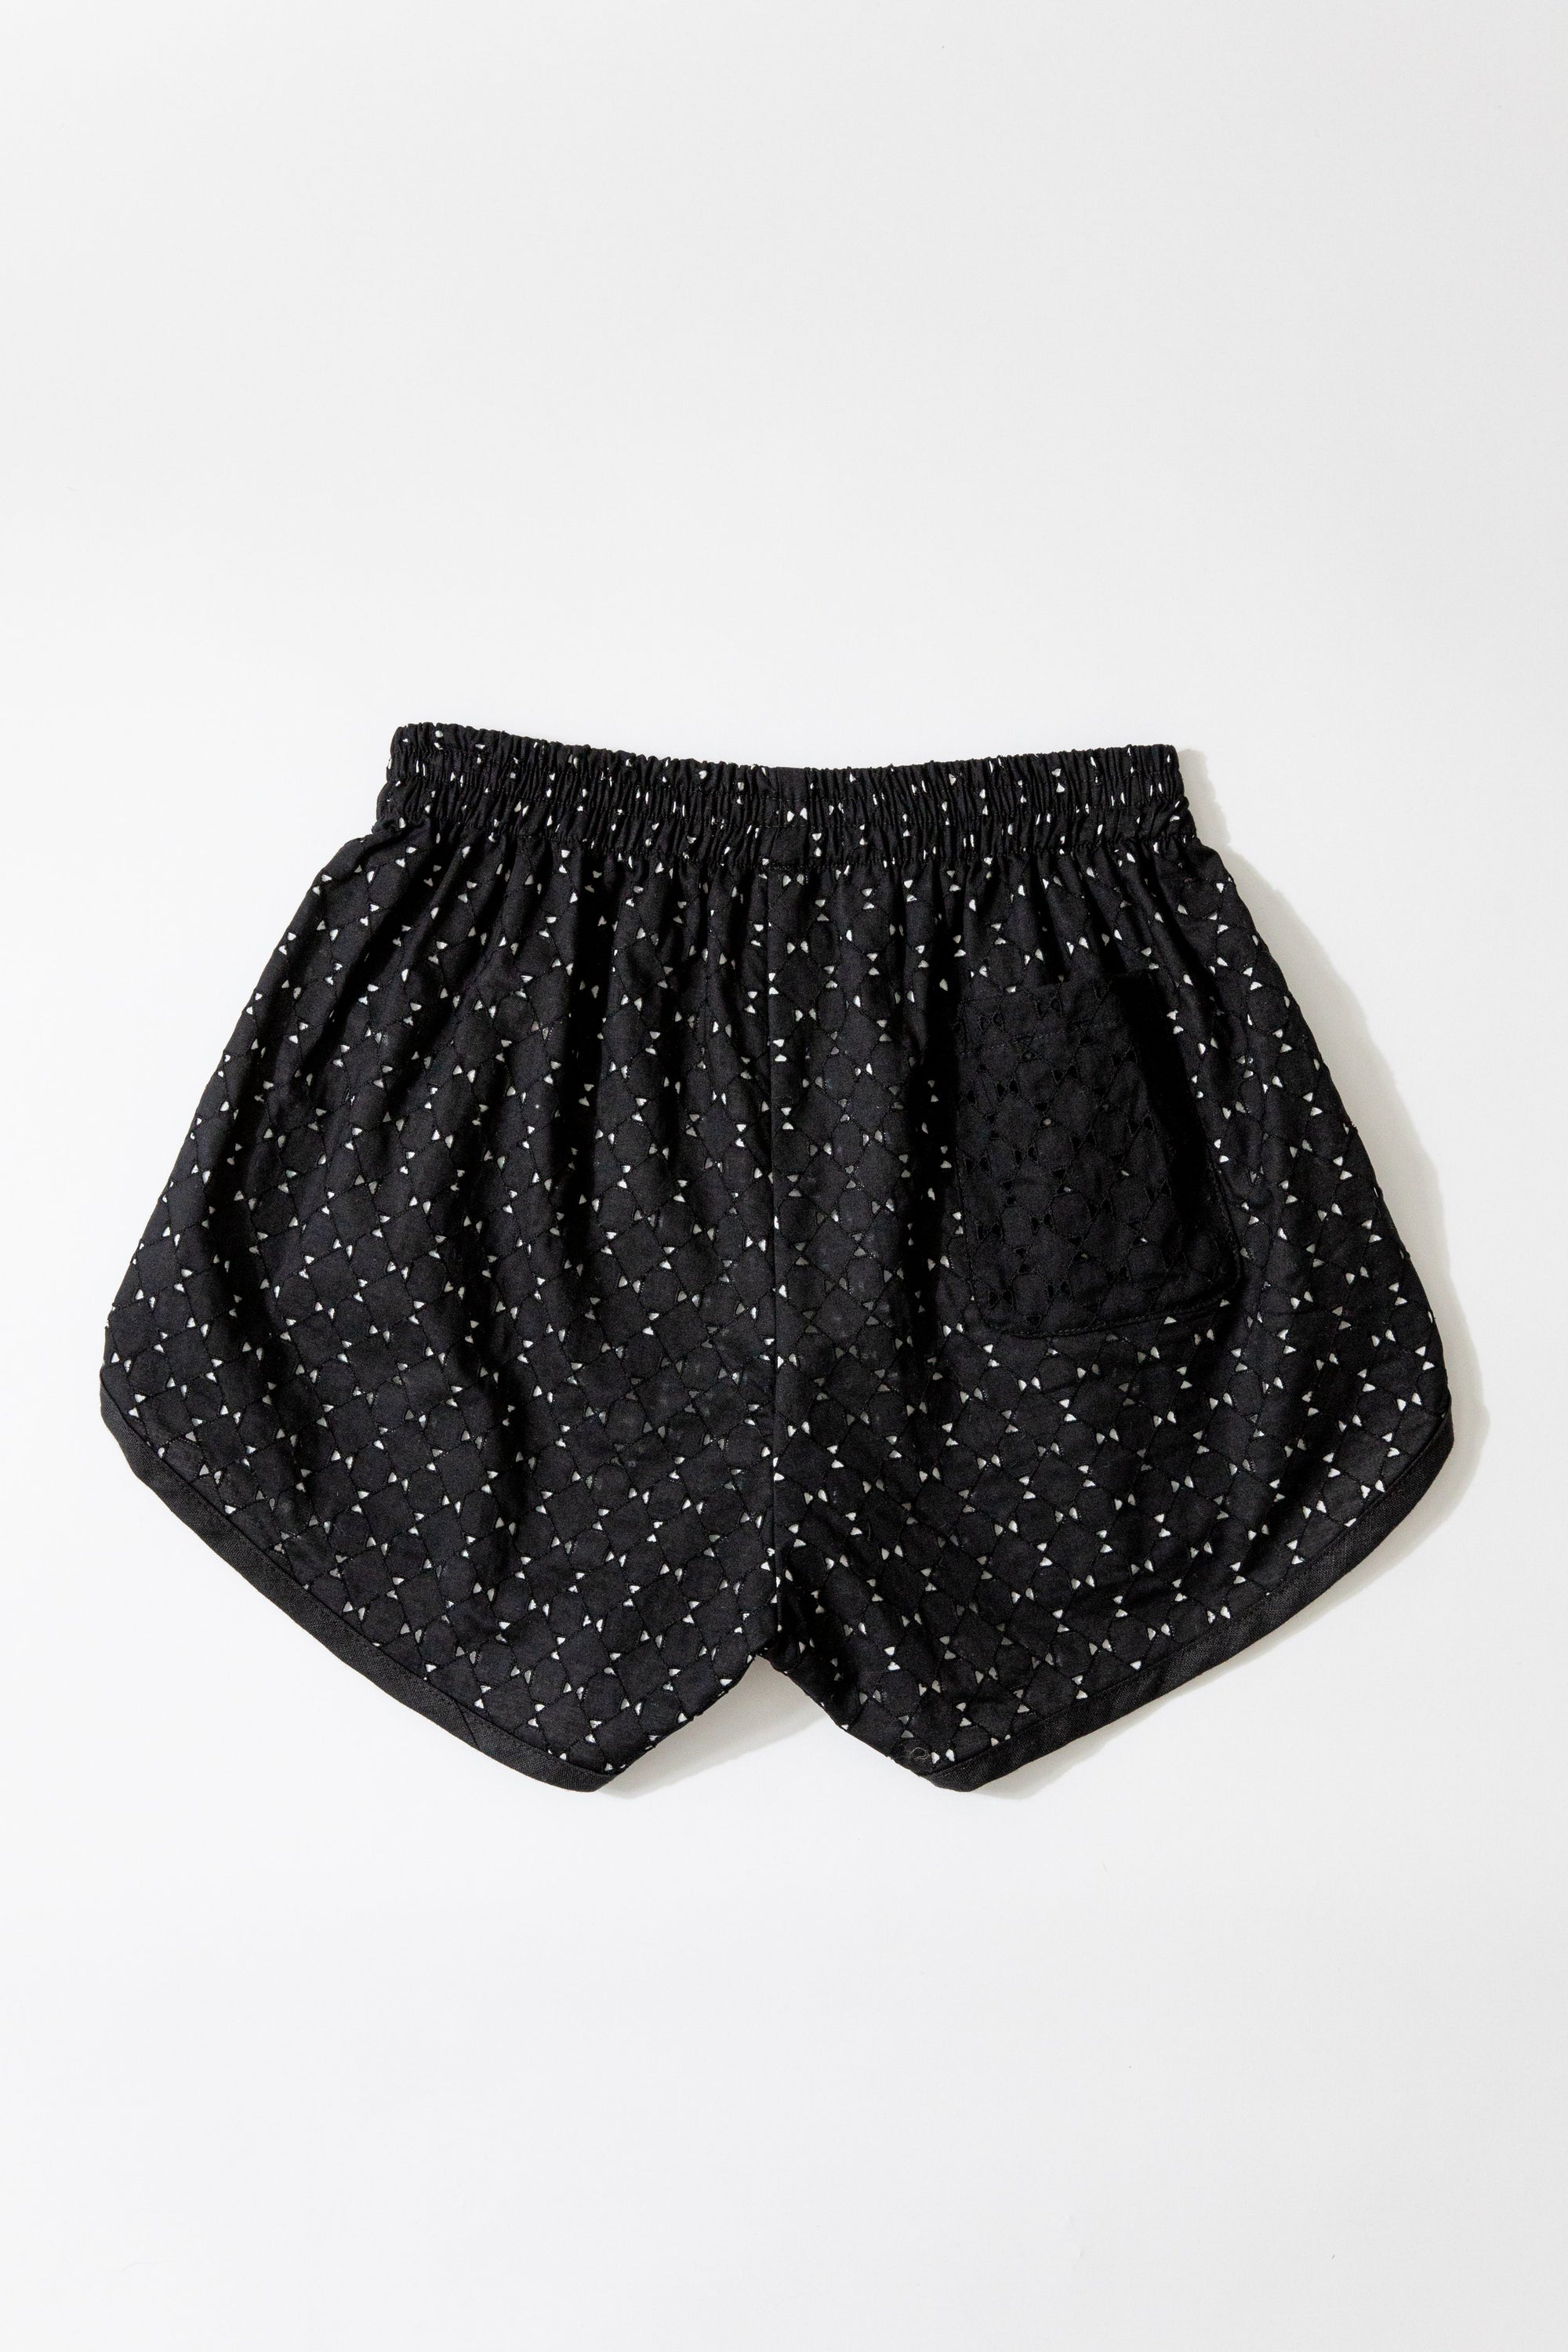 Tess Track Shorts in Black Lace